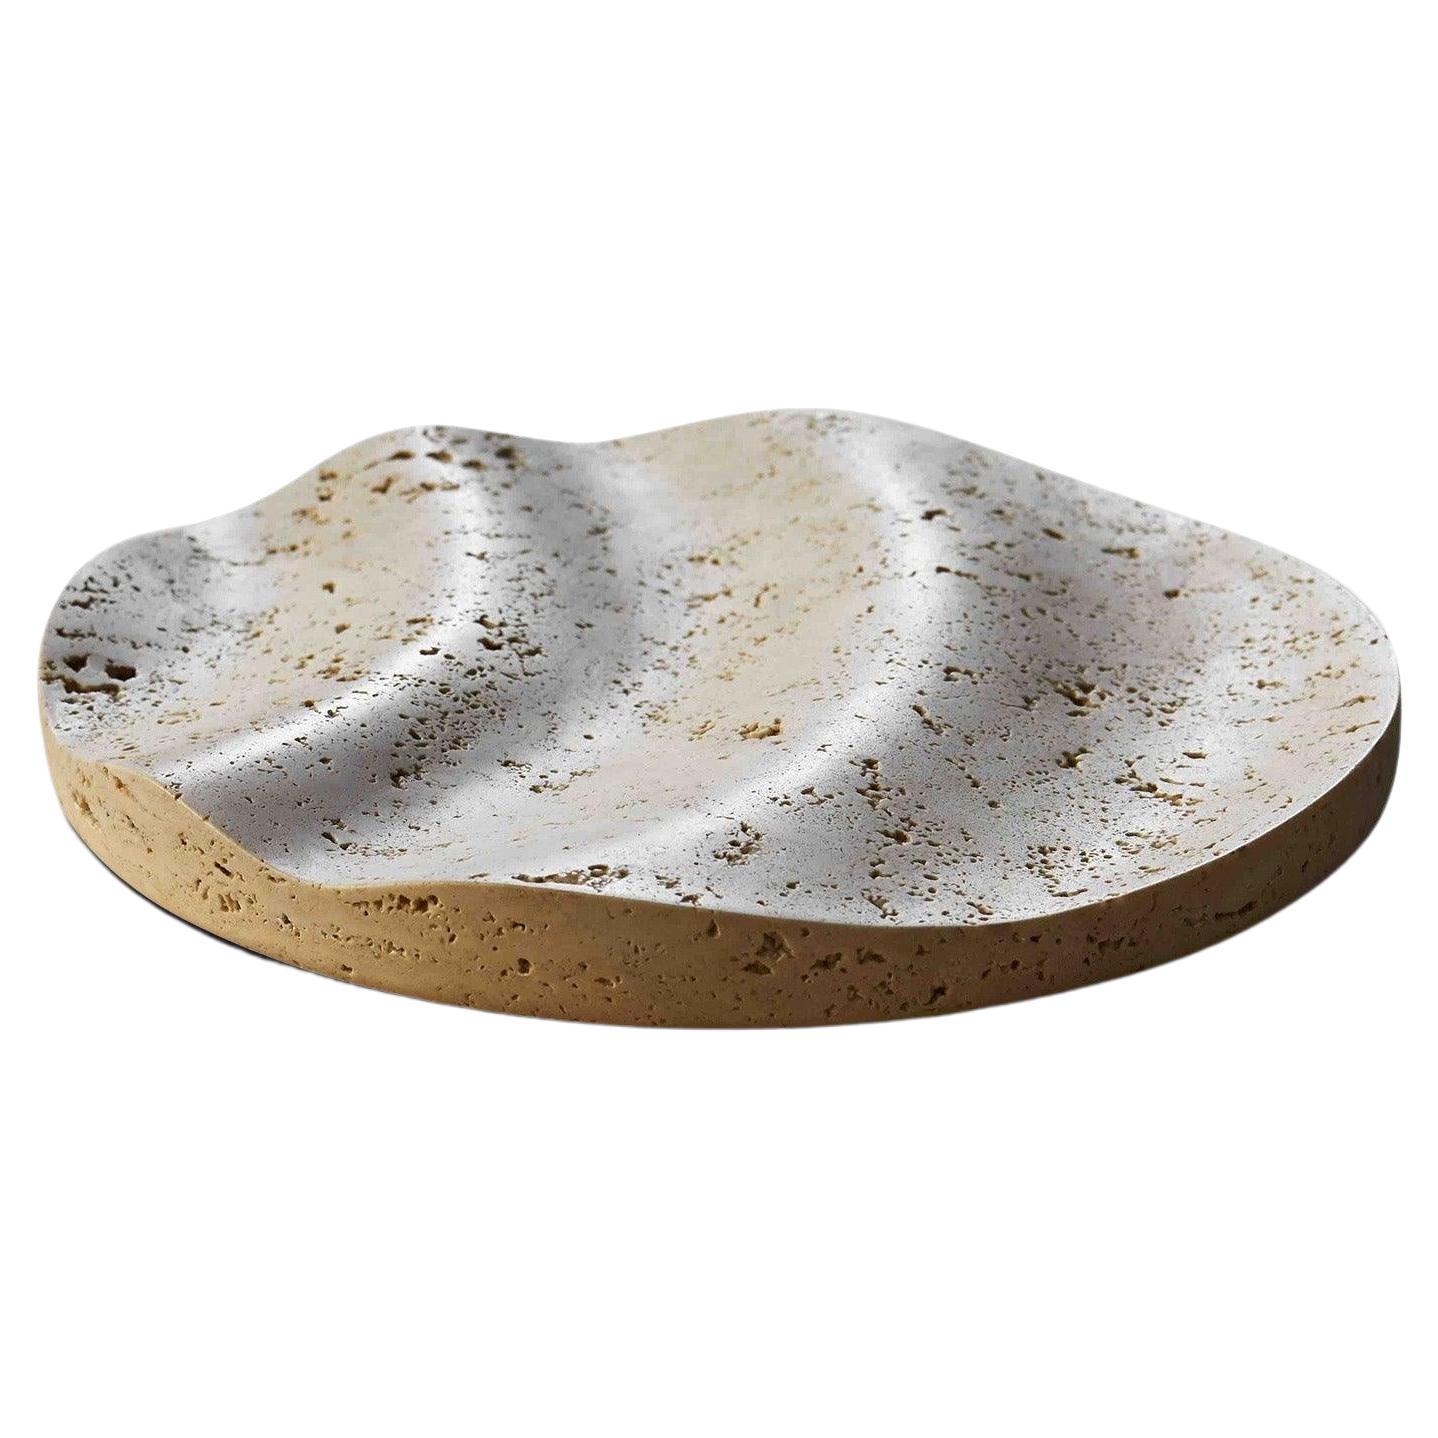 Travertine Ripple Fruitbowl by Dan Yeffet for Collection Particuliere For Sale